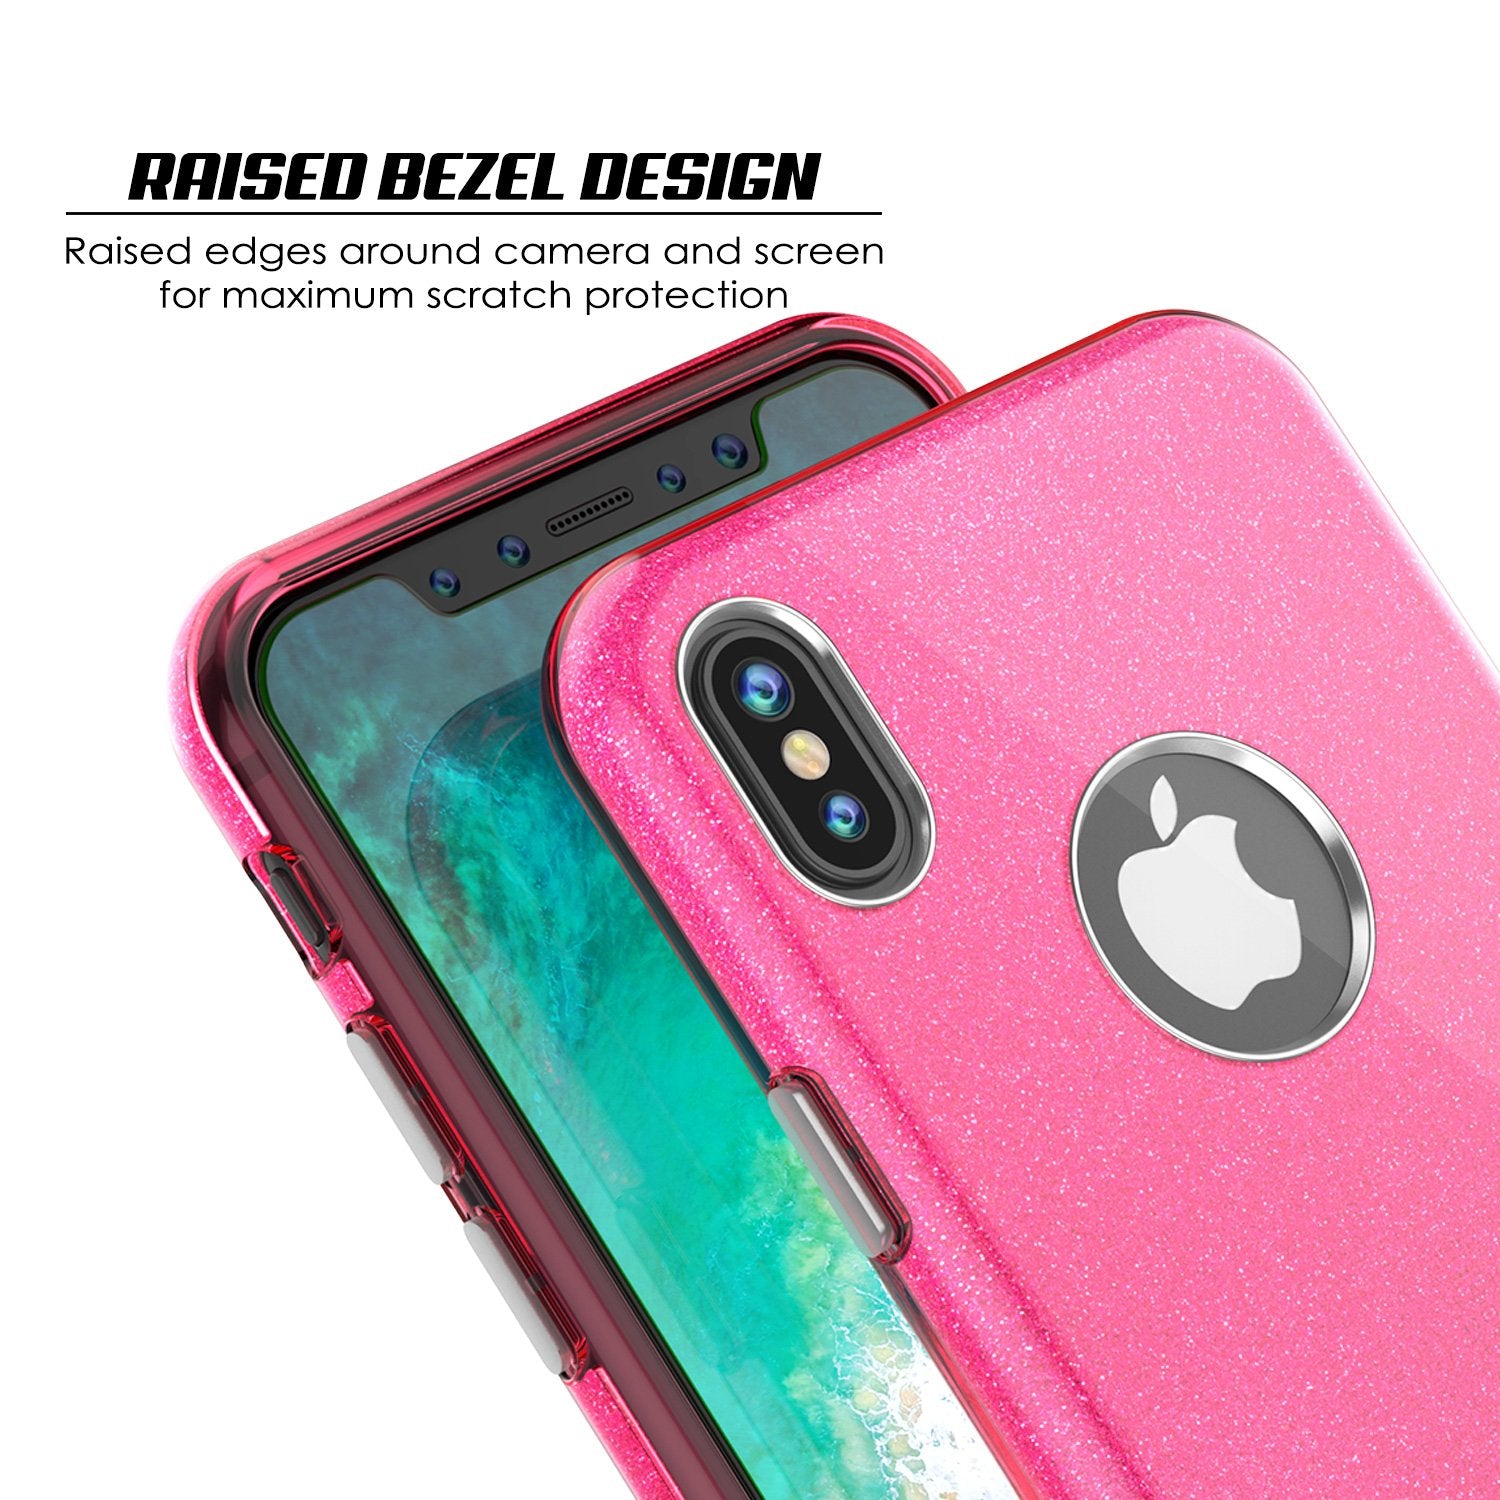 iPhone X Case, Punkcase Galactic 2.0 Series Ultra Slim w/ Tempered Glass Screen Protector | [Pink] - PunkCase NZ